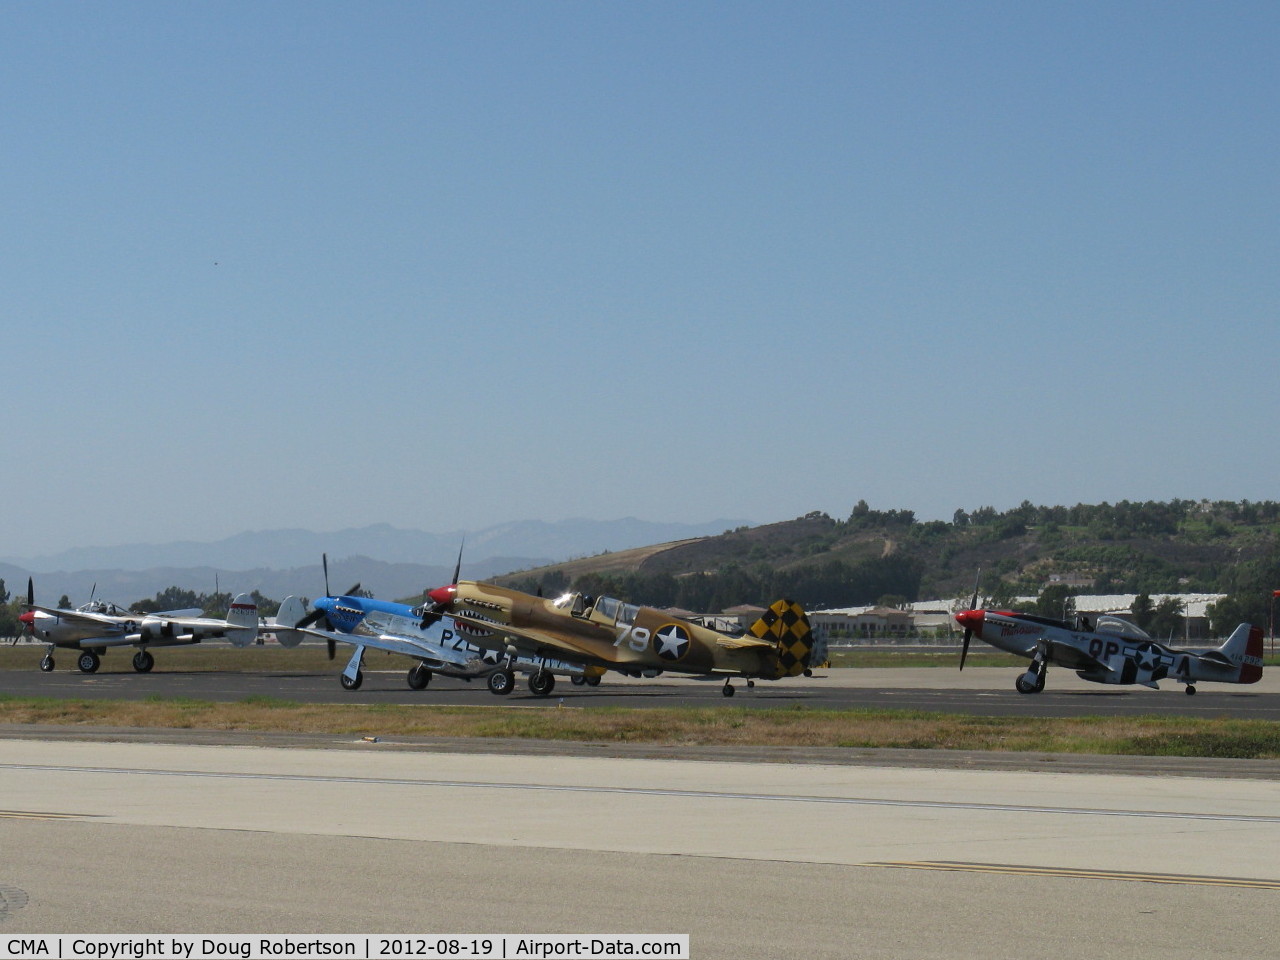 Camarillo Airport (CMA) - Wings Over Camarillo Airshow aircraft holding on taxiway per CMA Ground Control 121.8